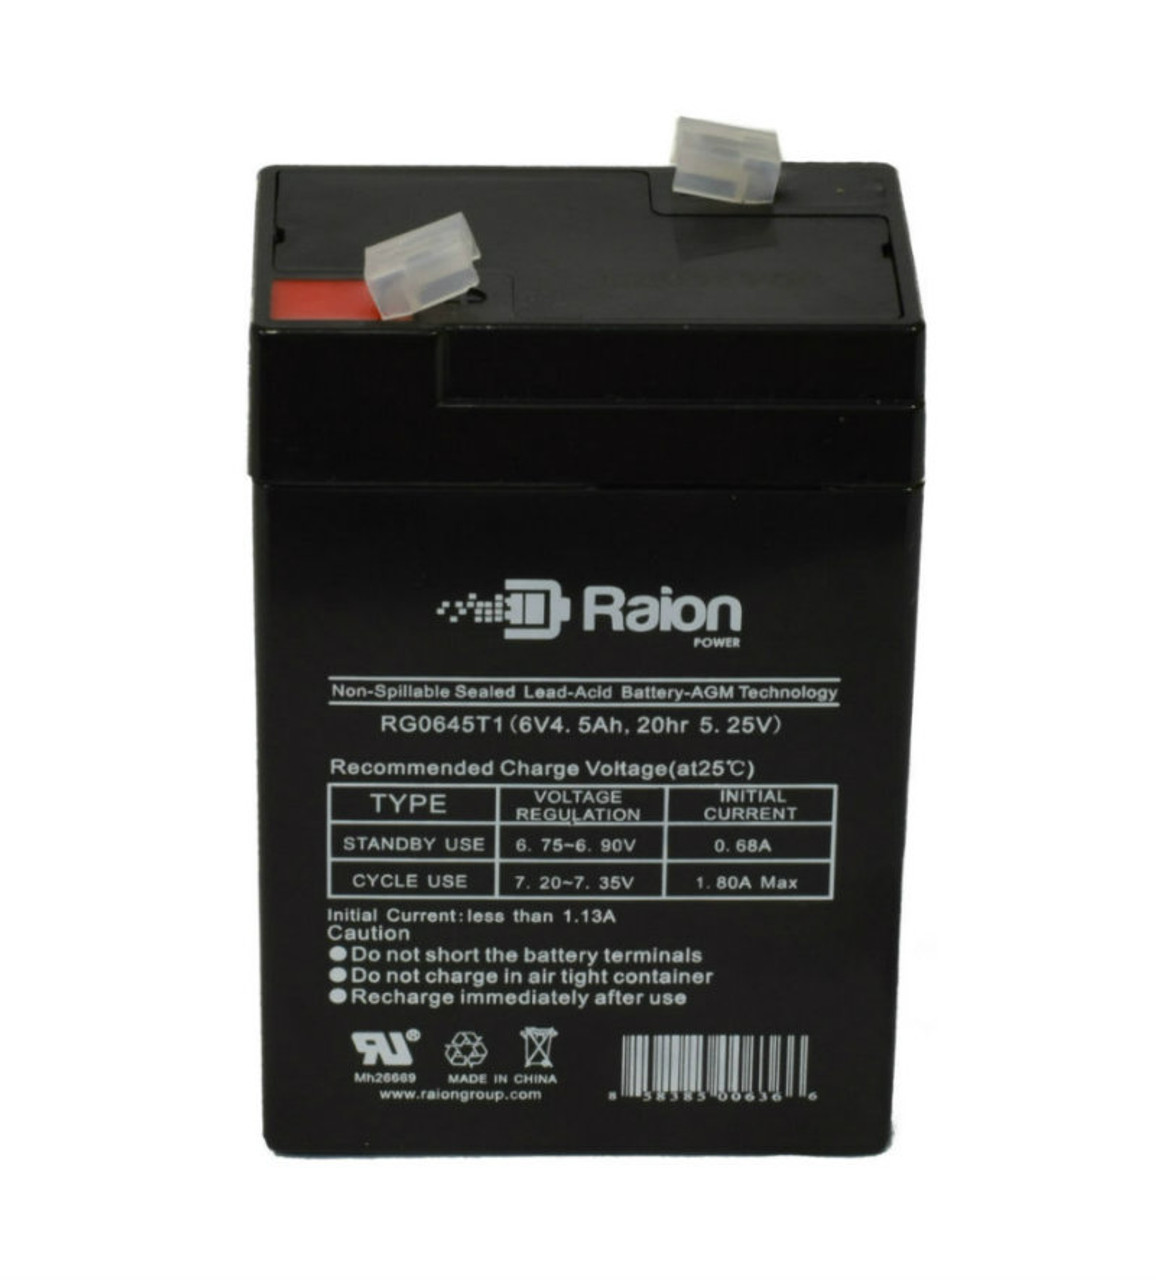 Raion Power RG0645T1 Replacement Battery Cartridge for McPhilben / Daybright DBL6V5A1